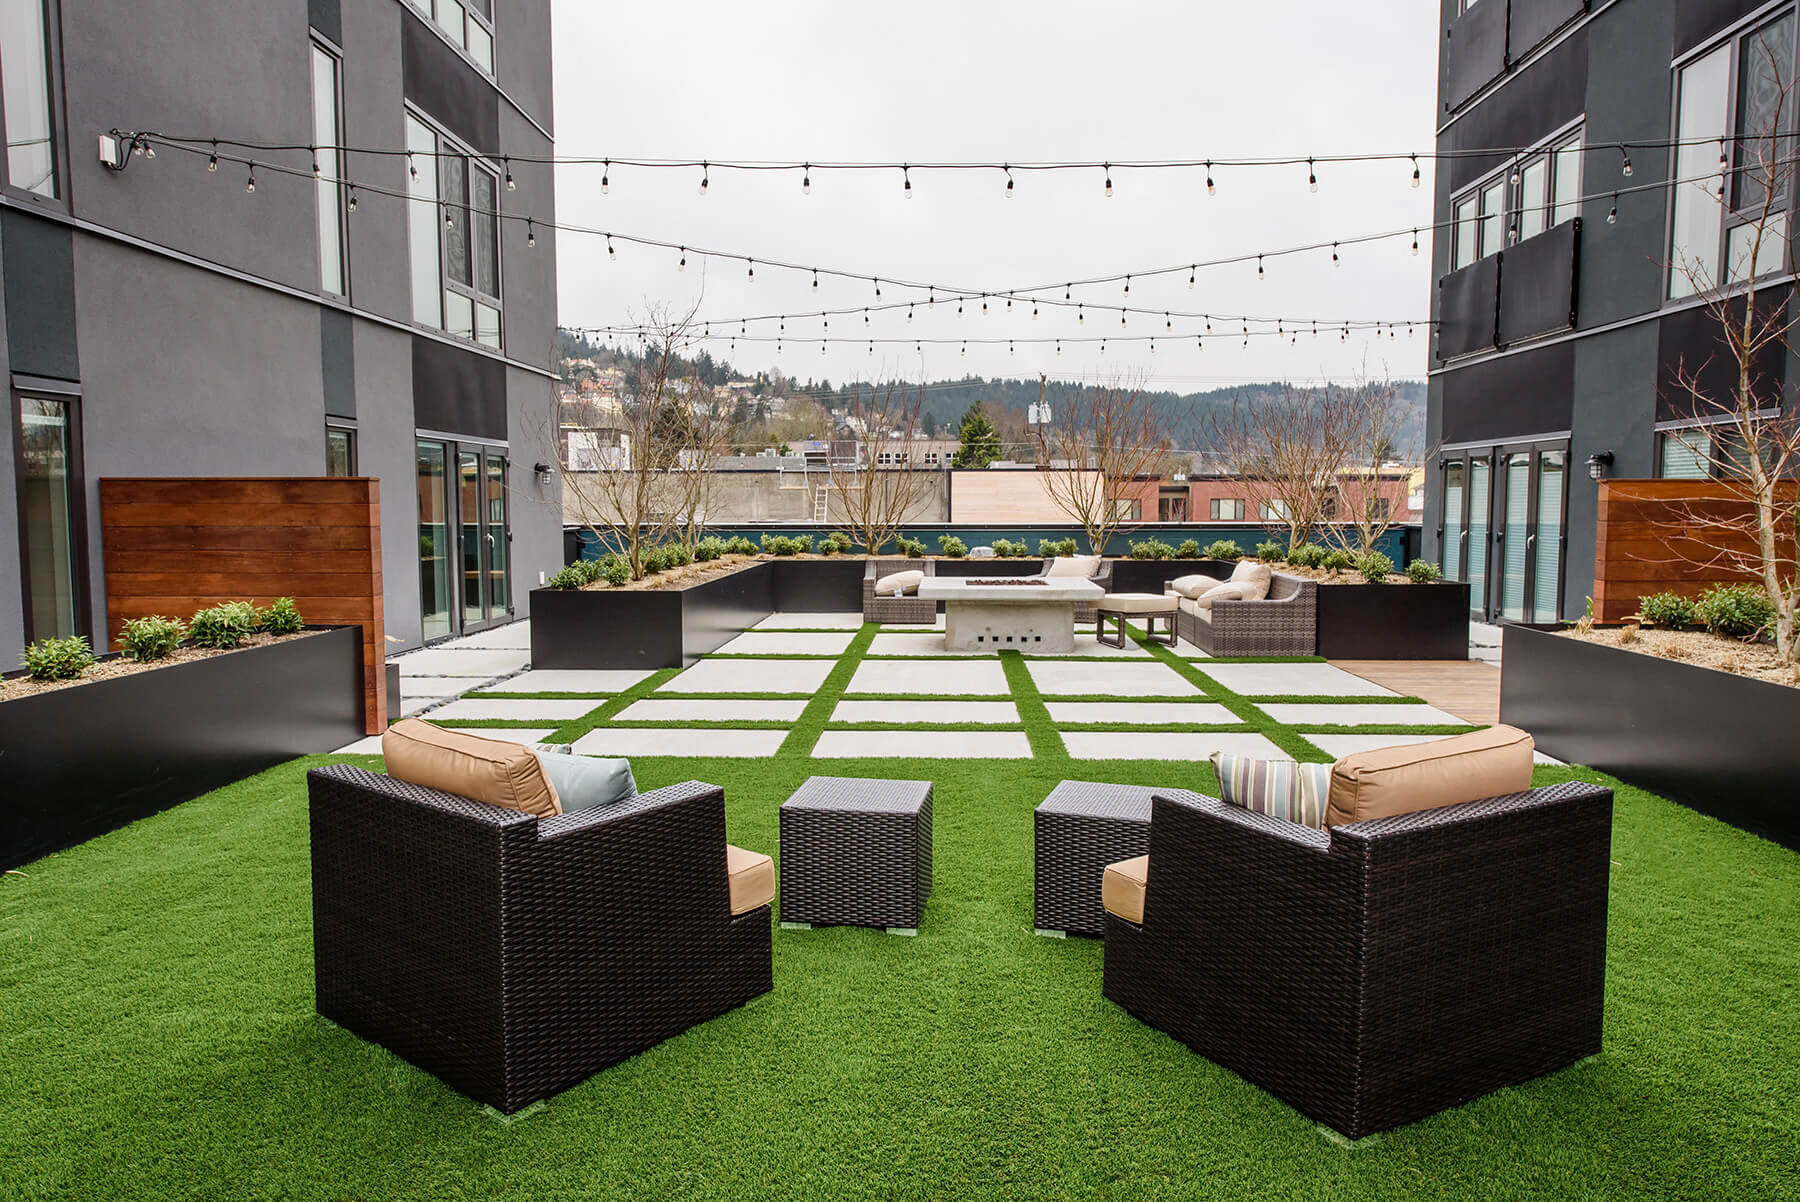 The courtyard fire lounge at the Q21 Apartments in Portland, Oregon.